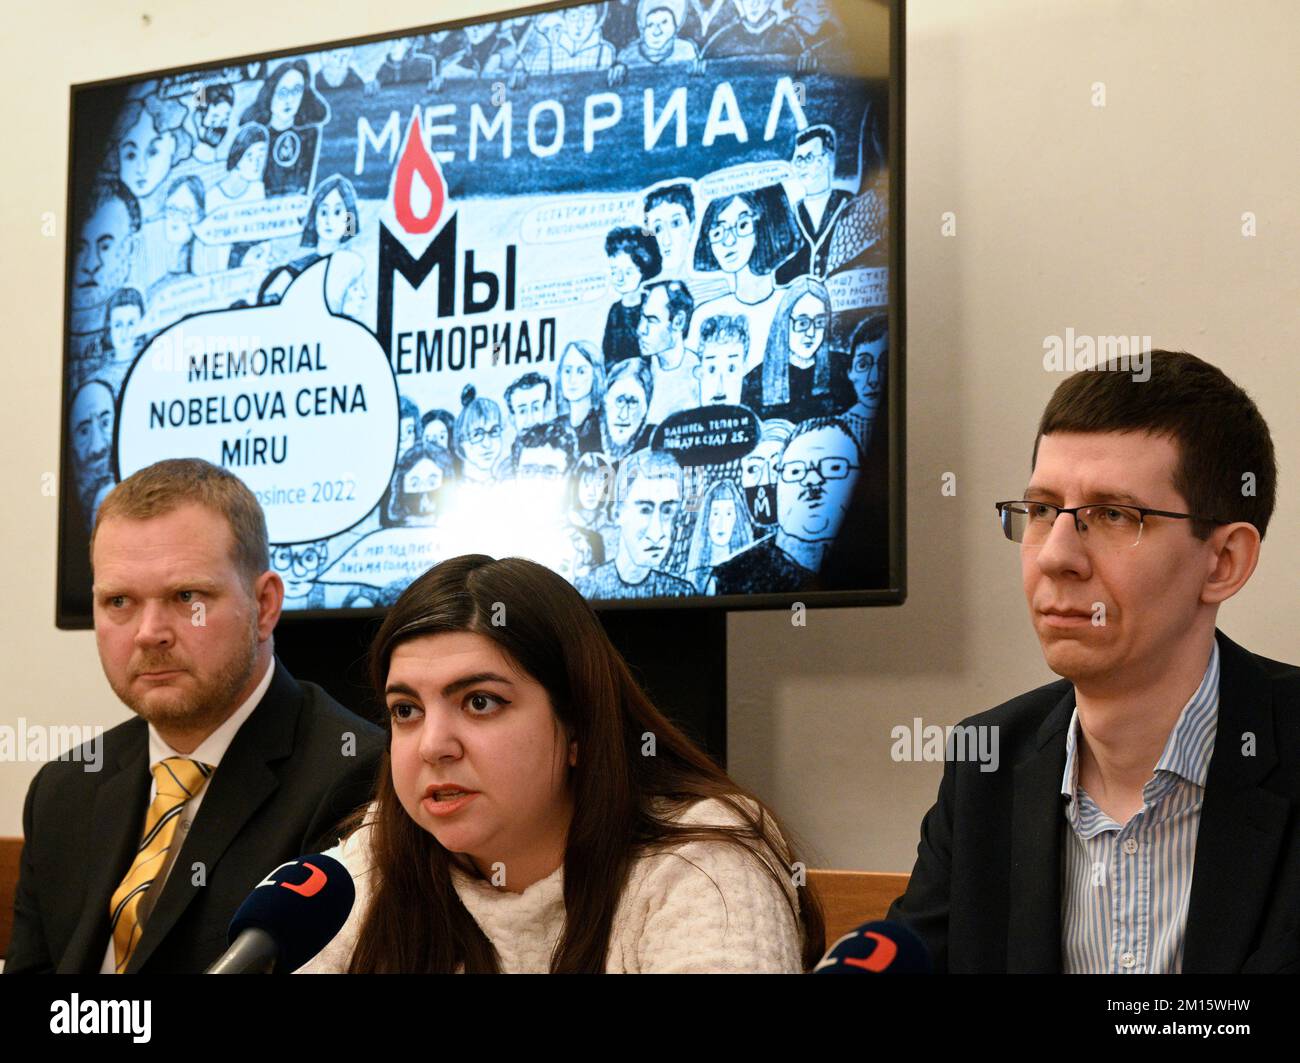 Stepan Cernousek, from left, Tamila Imanova and Igor Gukovsky of the Memorial association attend a press conference in Prague on occasion of the awarding of the Nobel Peace Prize to Memorial in Oslo today, on Saturday, December 10, 2022. Belenkin hopes that the Memorial human rights organisation, for which he works, will be able to keep working in Russia despite the very difficult circumstances, he said at a press conference. Along with Memorial, the Ukrainian human rights organisation Center for Civil Liberties and imprisoned Belarusian human rights advocate Ales Bialiatski who founded the Vi Stock Photo